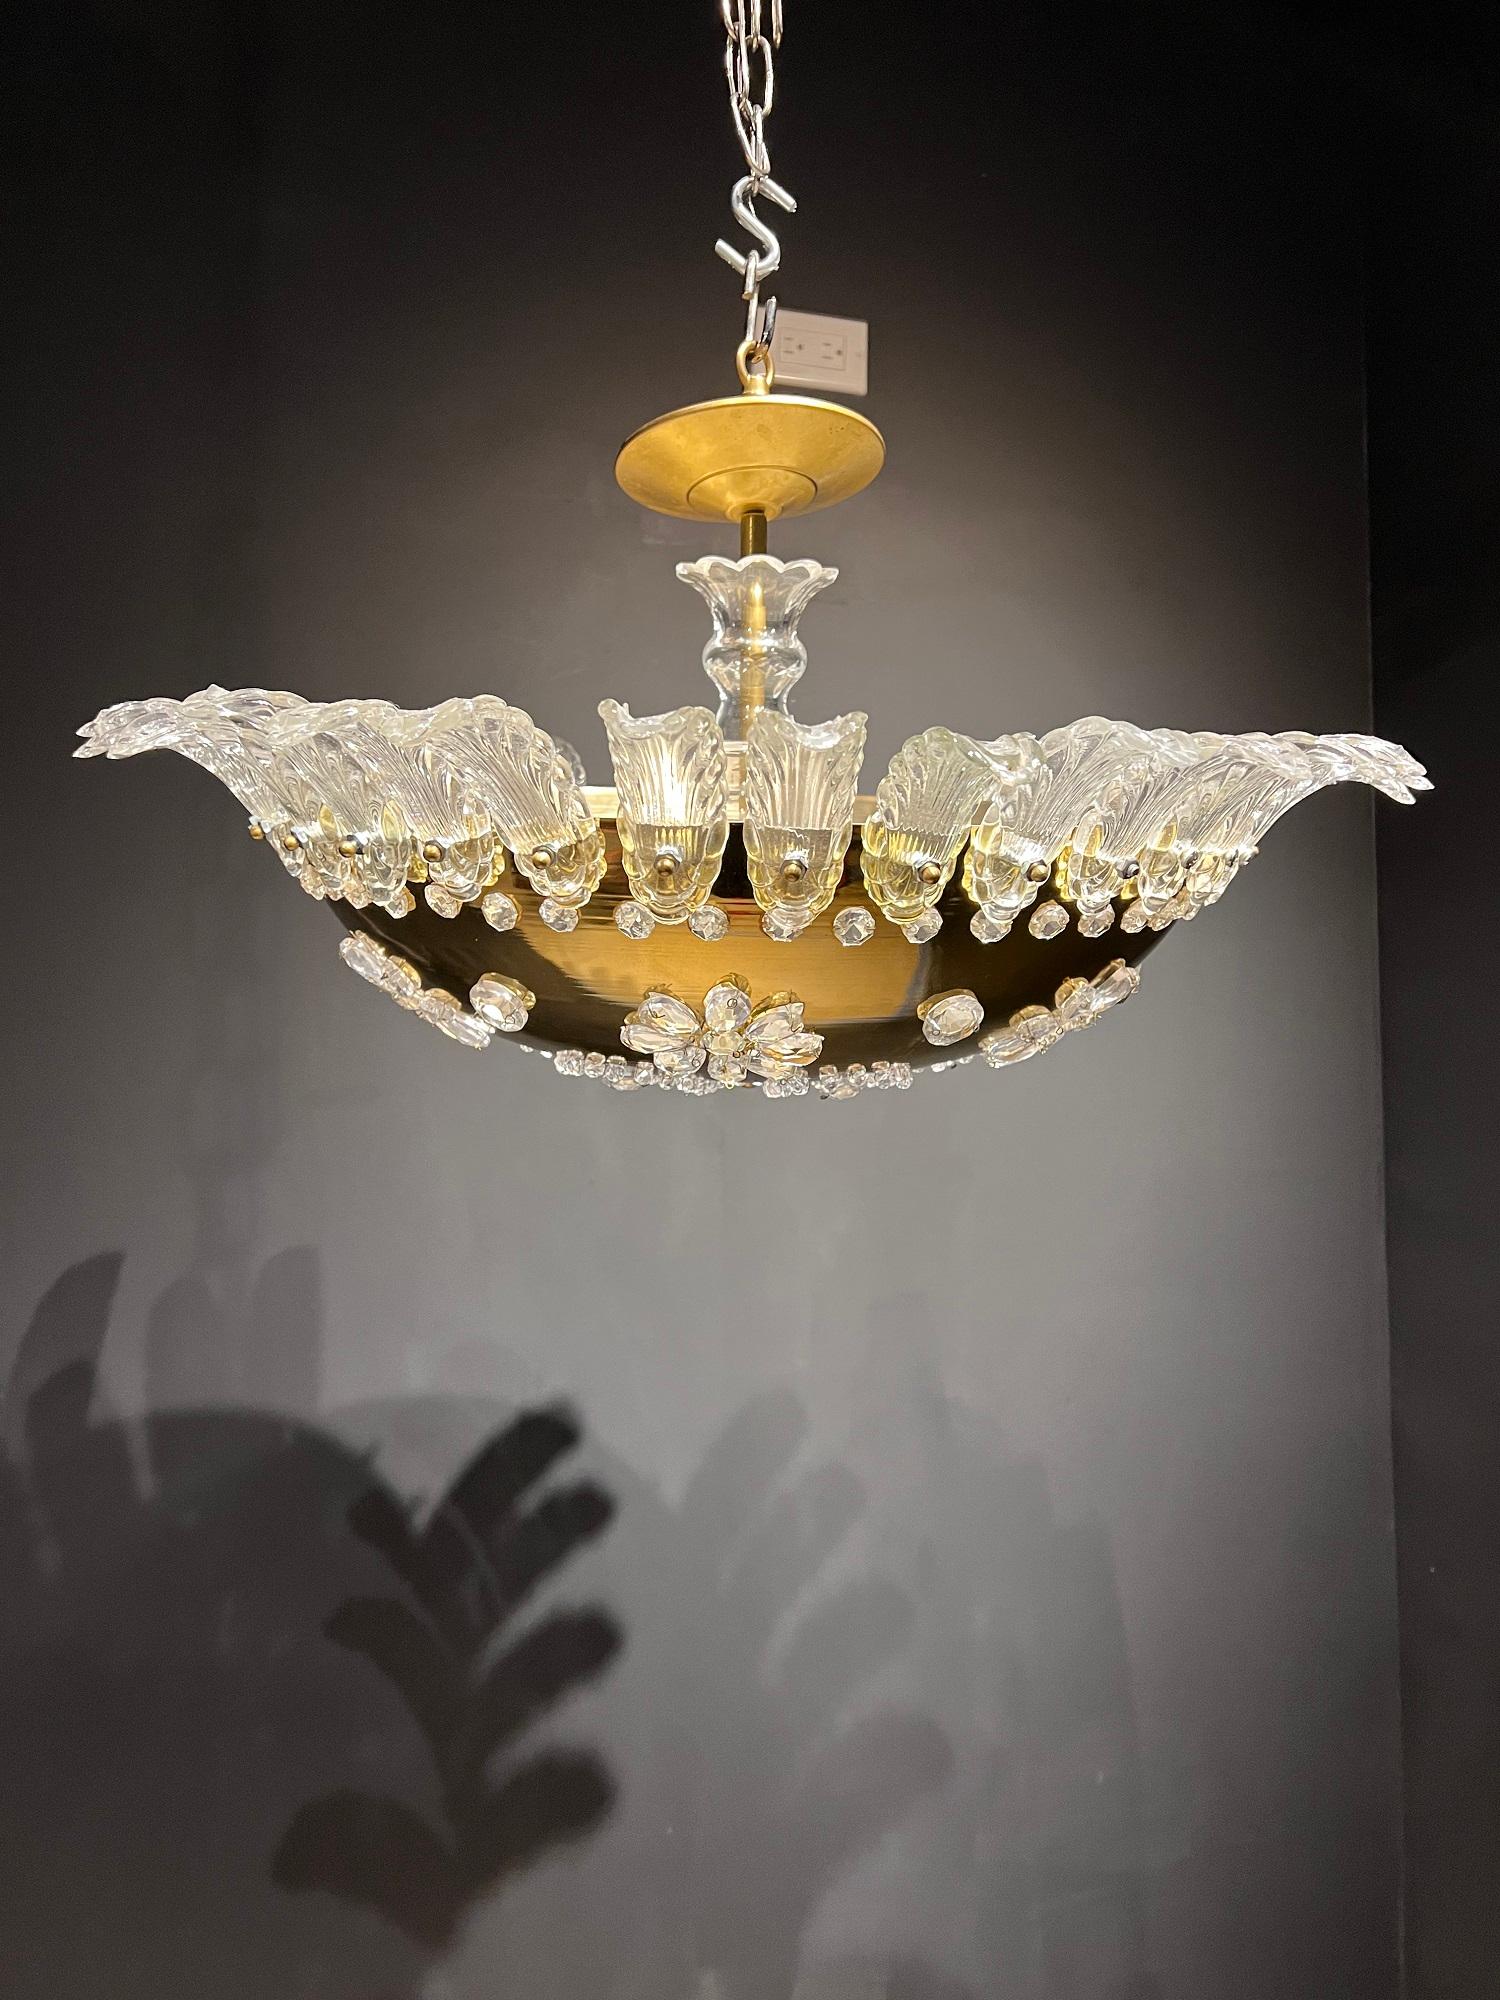 A French golden bronze light fixture with glass leaves on top and glass flowers on the body, circa 1930s. In very good vintage condition.

Dealer: G302YP
